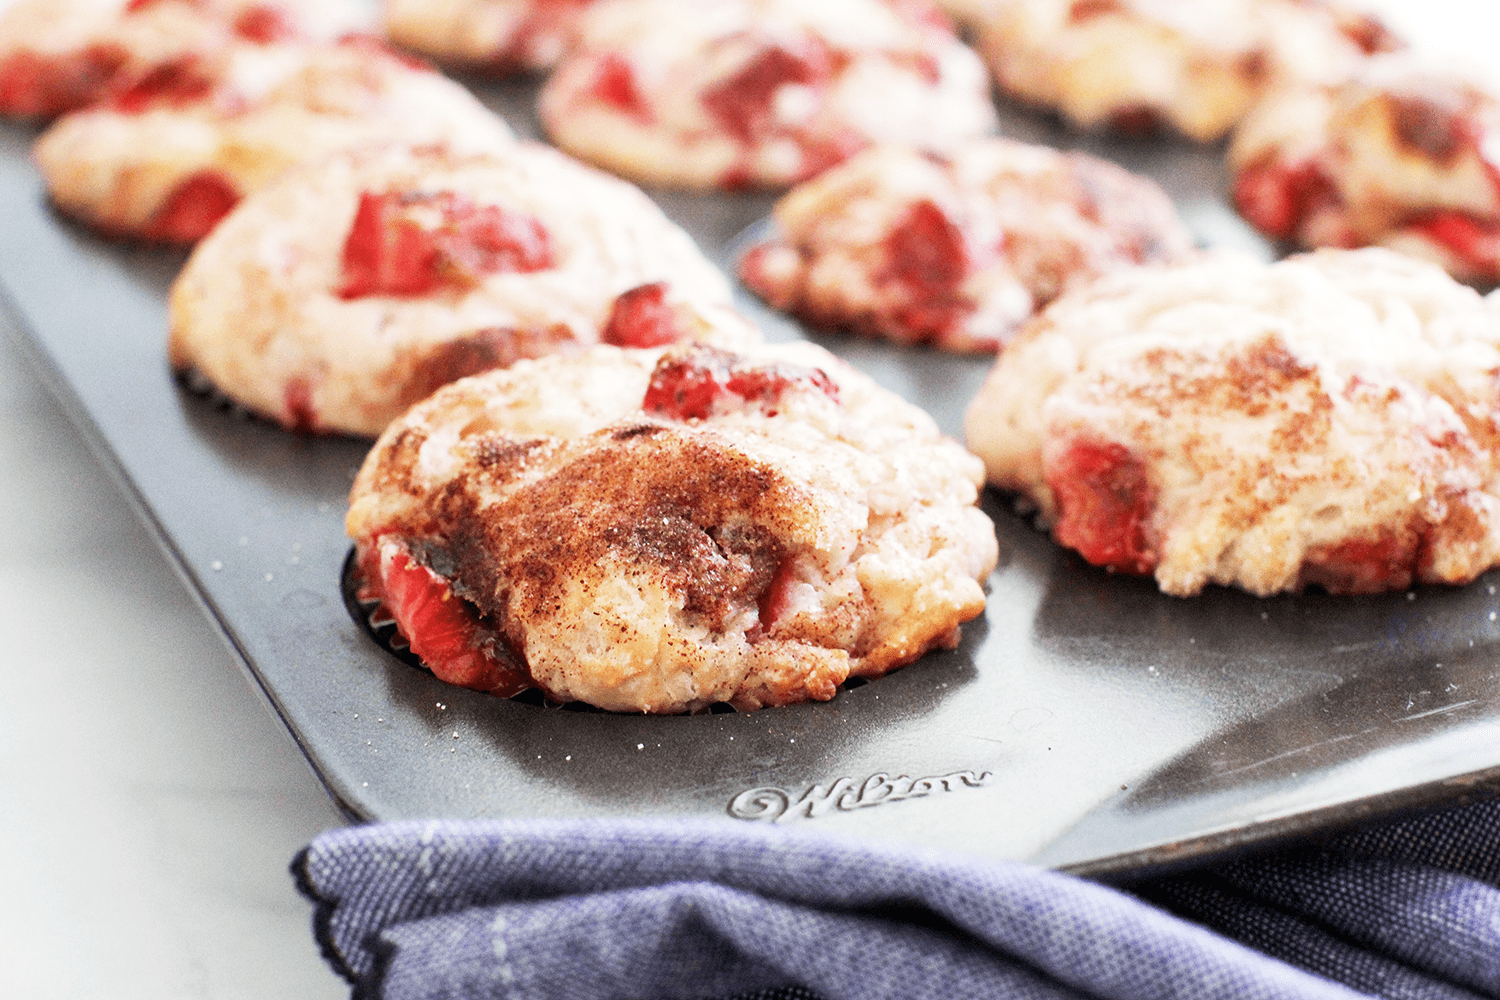 Strawberry muffins just baked and taken from the oven © DearCreatives.com